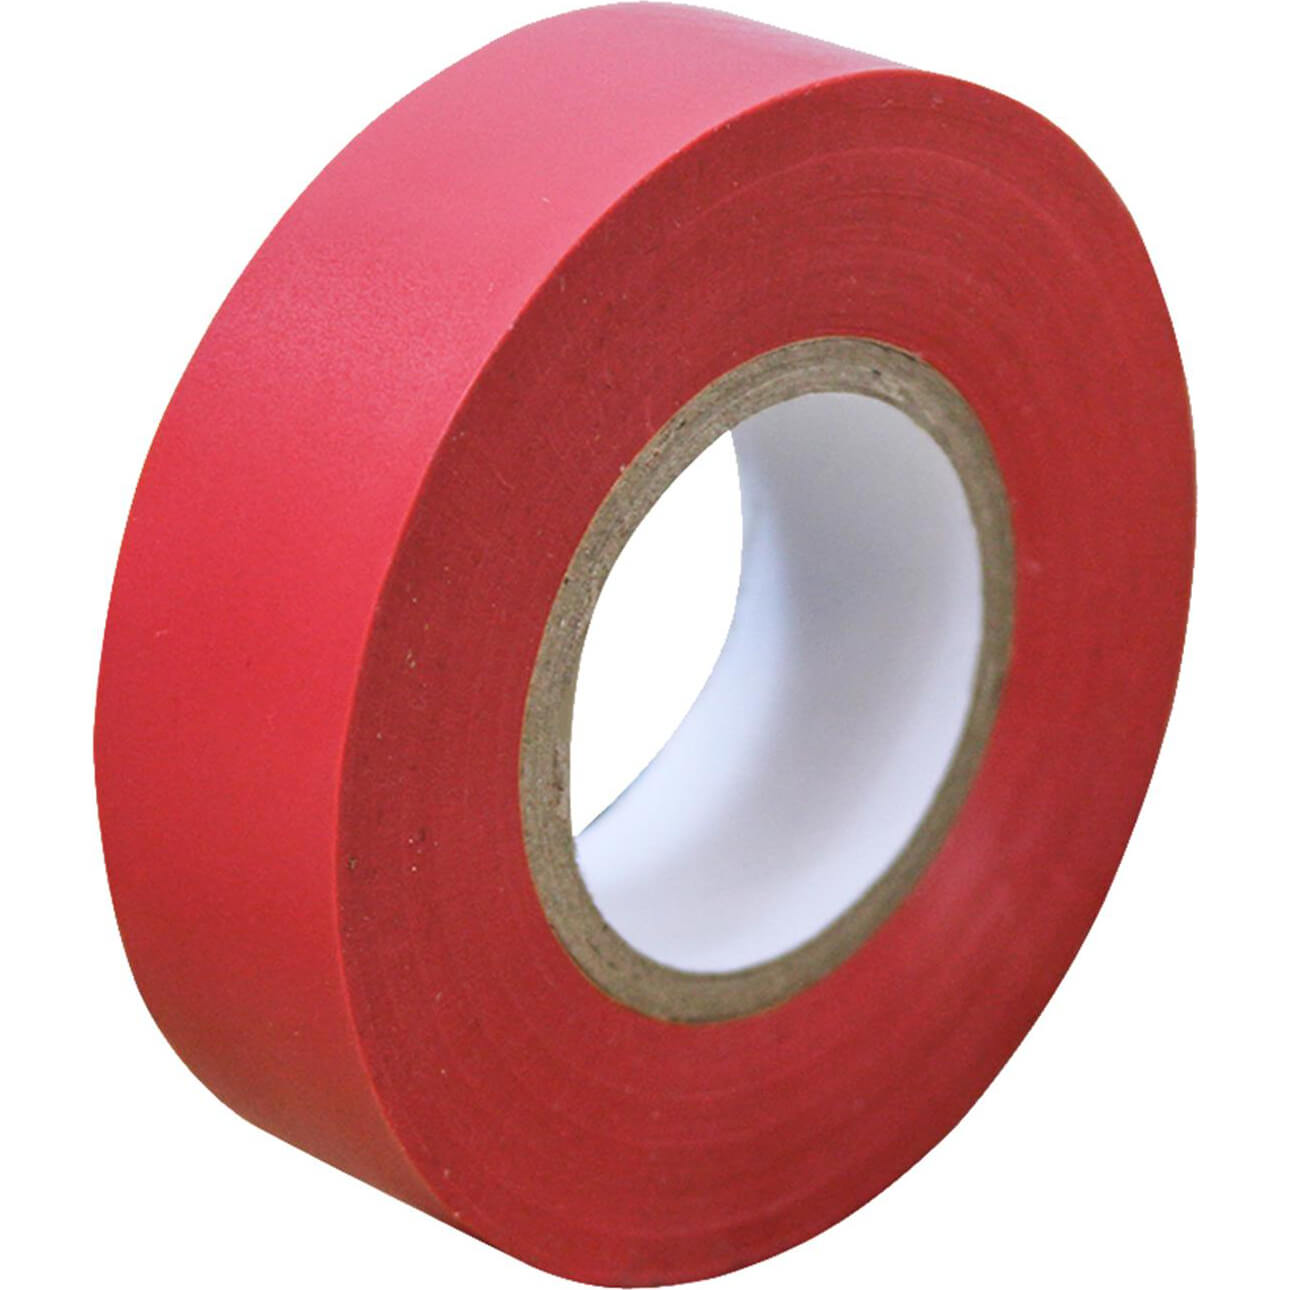 Image of Sirius Electrians PVC Insulation Tape Red 19mm 33m